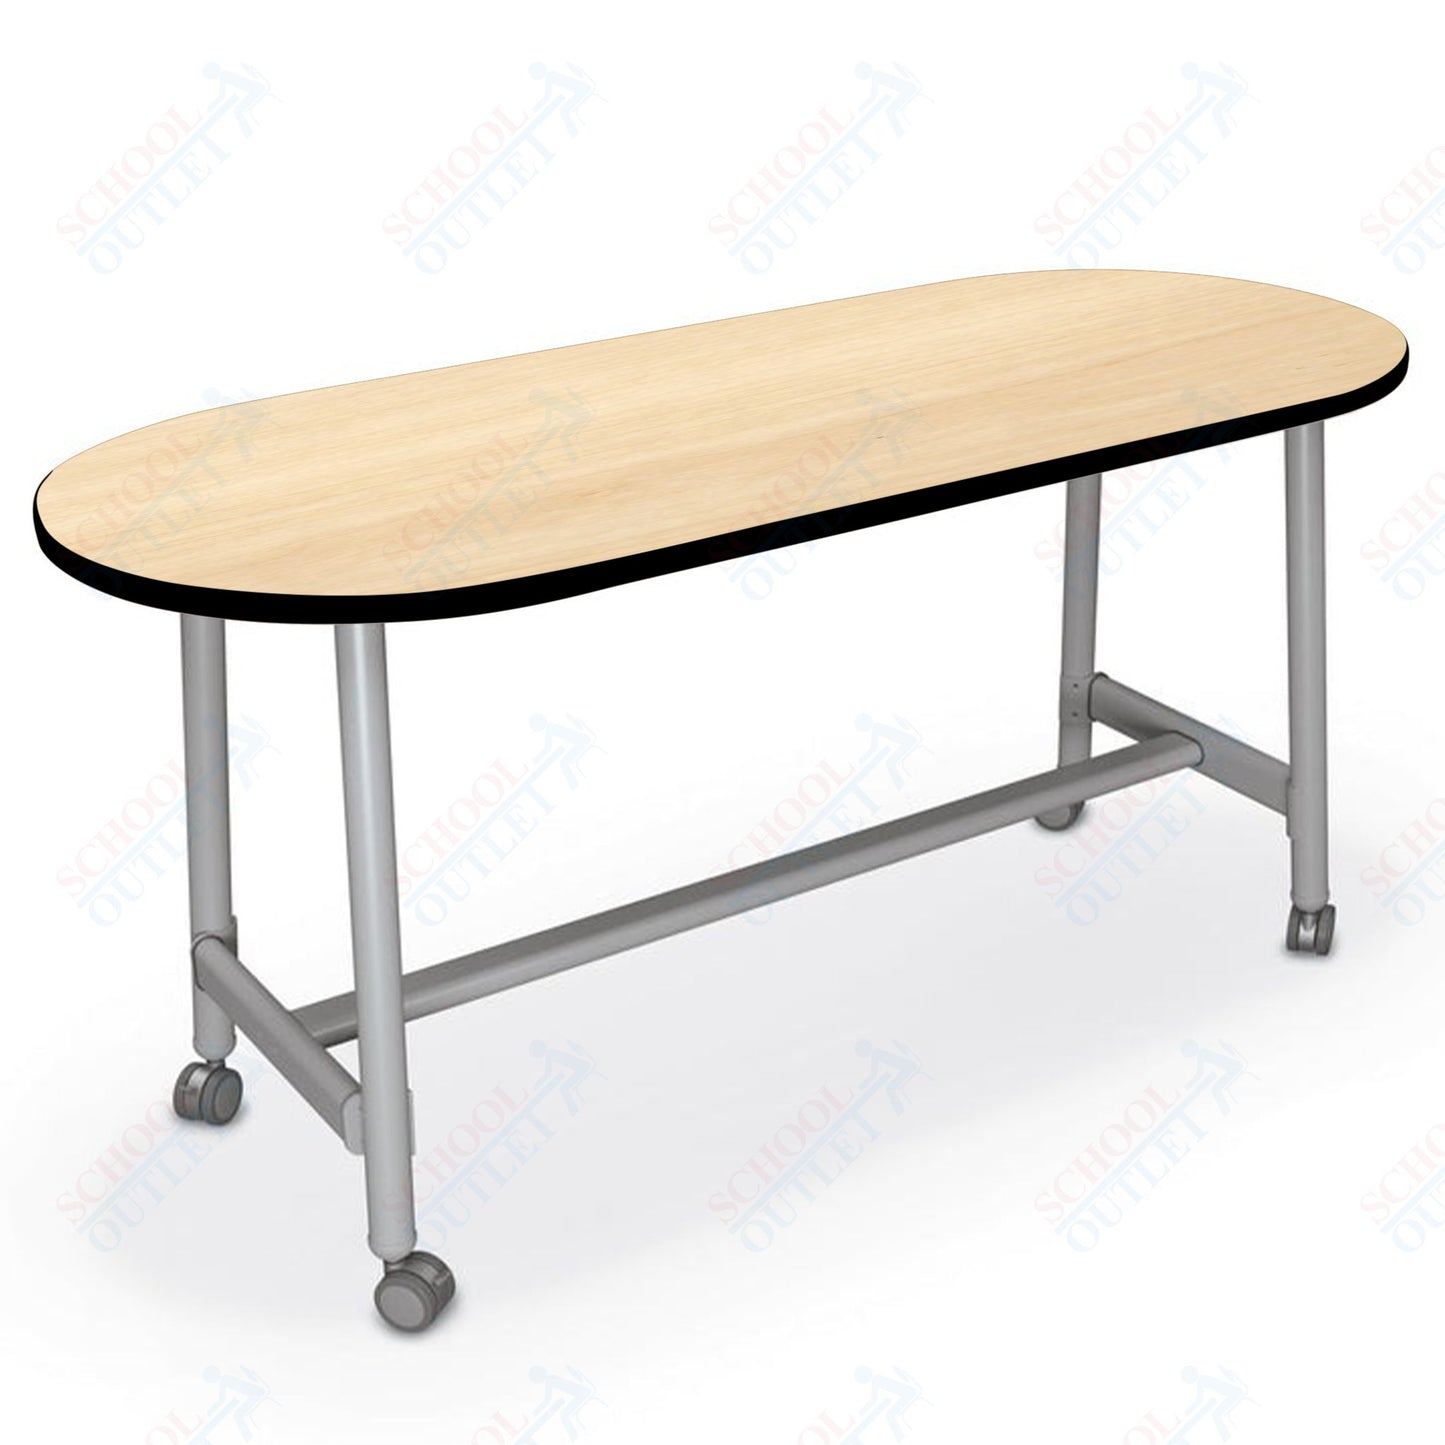 Mooreco Akt Table – 30"D x 72"W Racetrack, Laminate Top, Fixed Height Available in 29"H, 36"H, or 42"H